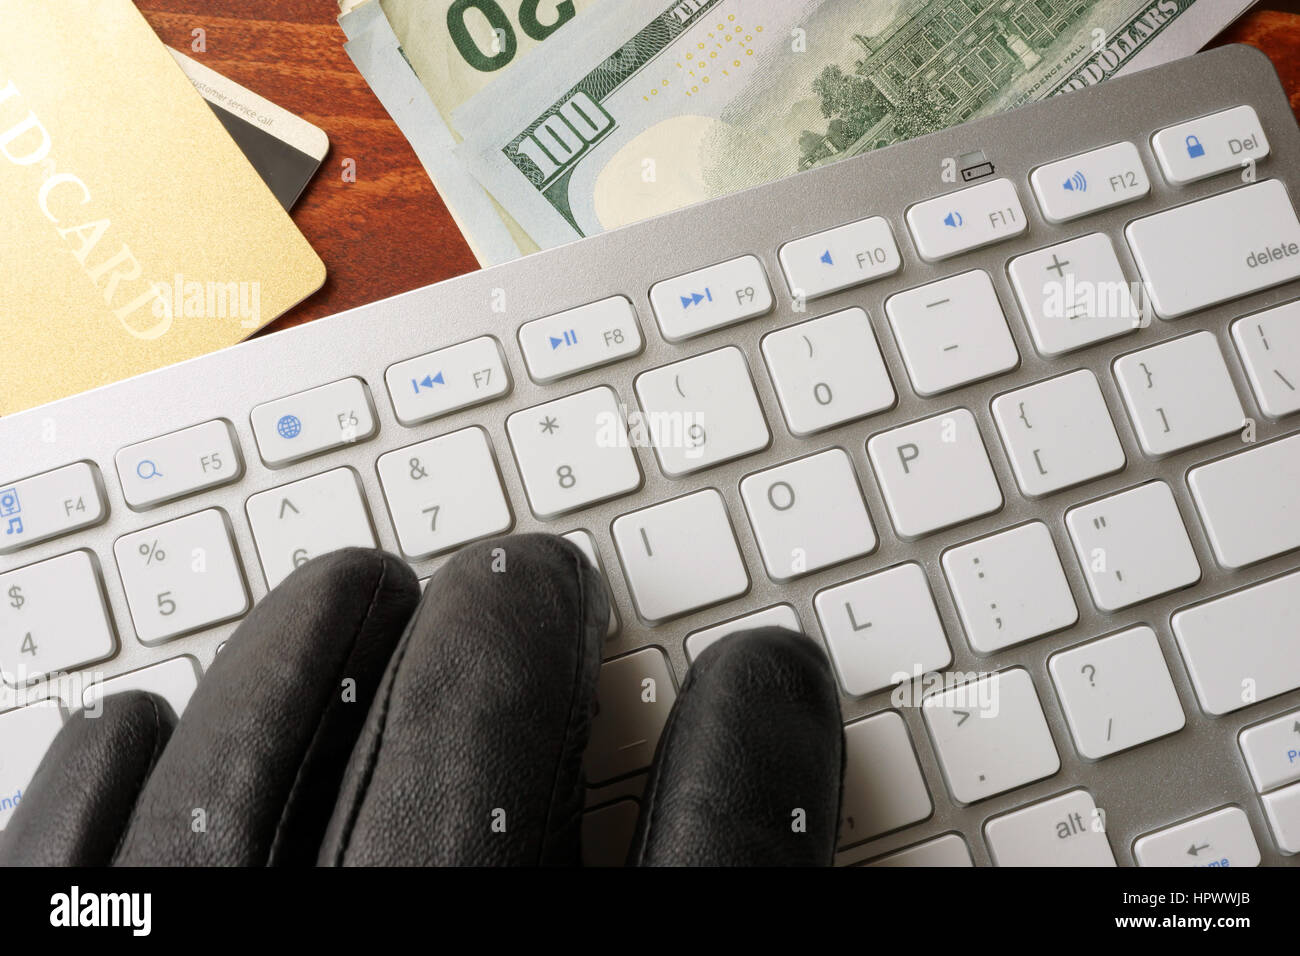 Hacking concept. Hand in black glove is typing on a keyboard. Stock Photo